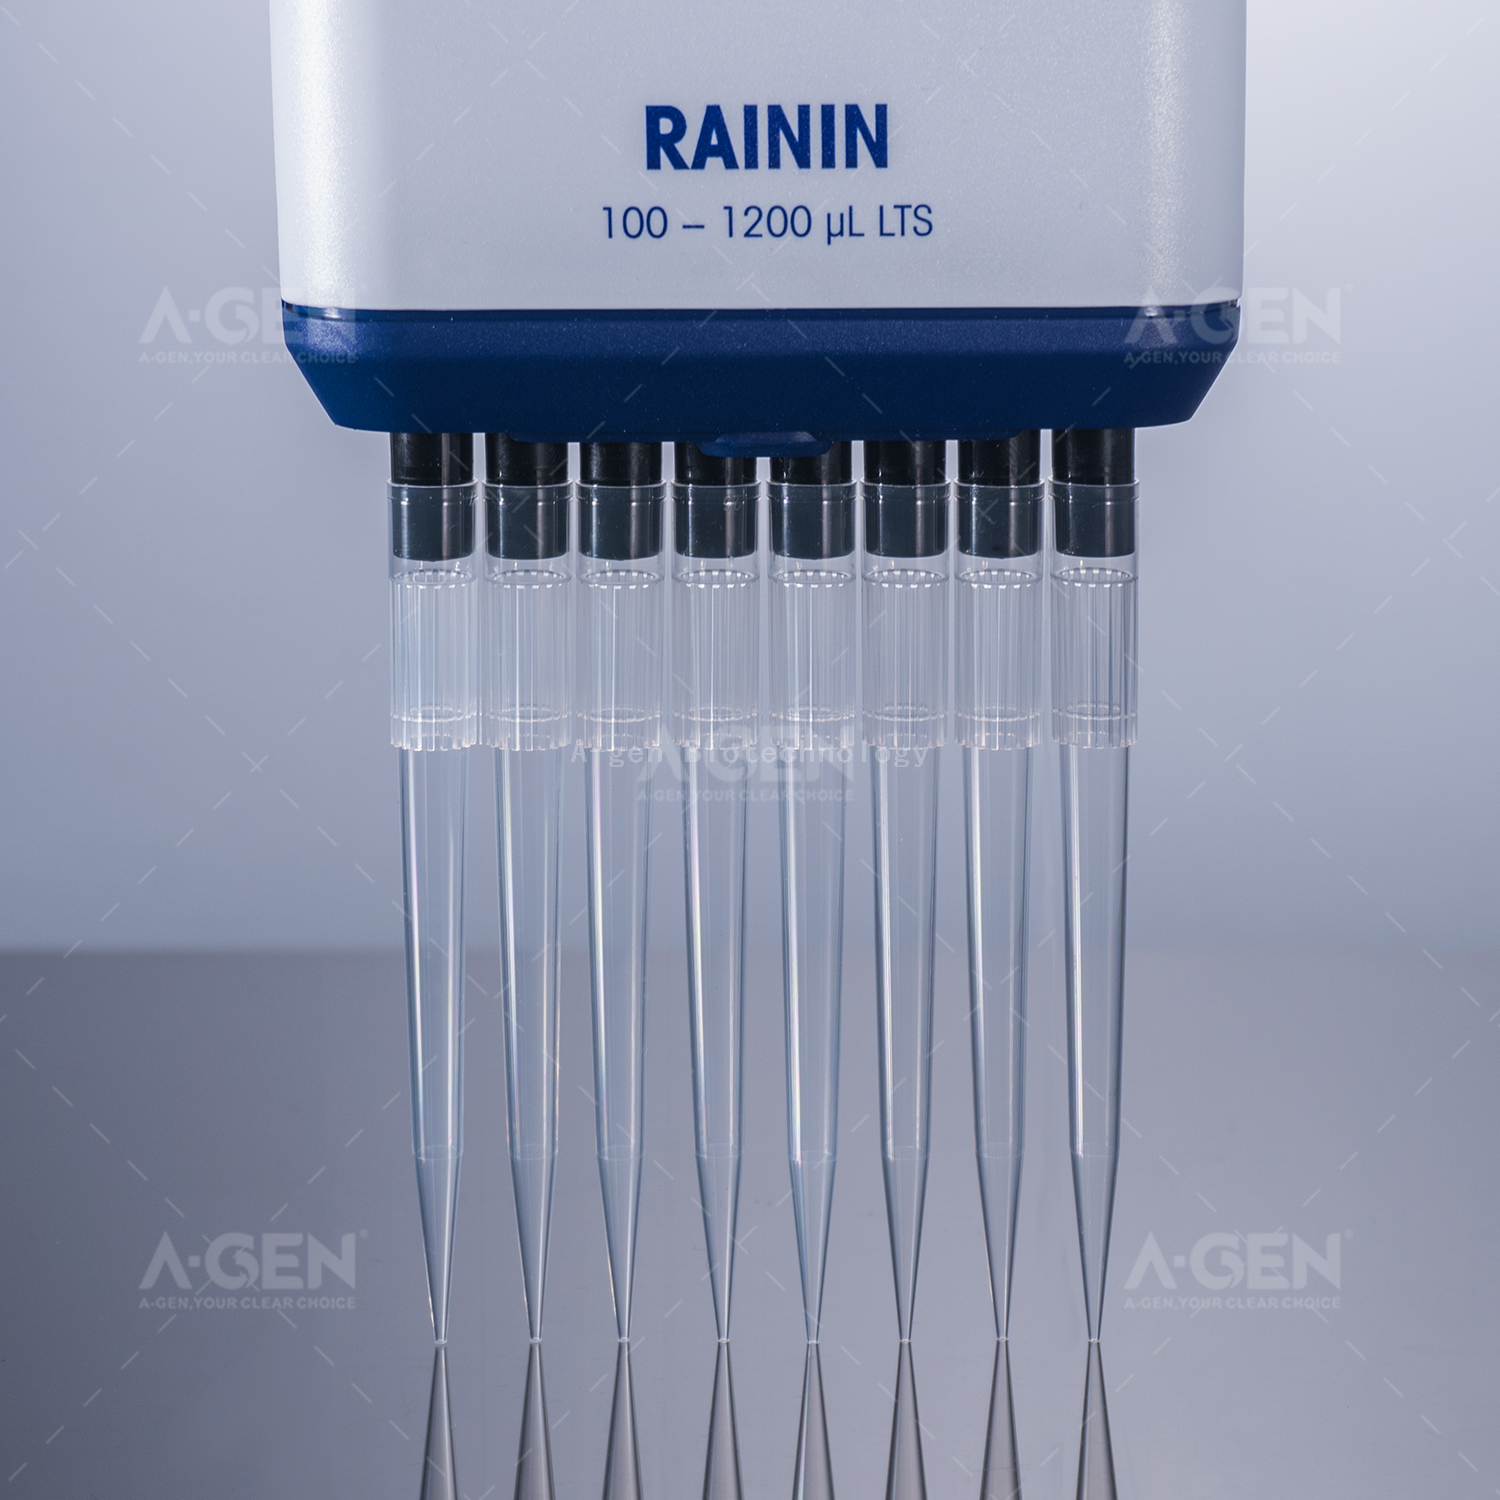 Rainin Low Retention 1000uL Transparent LTS Tip Packed in Rack 